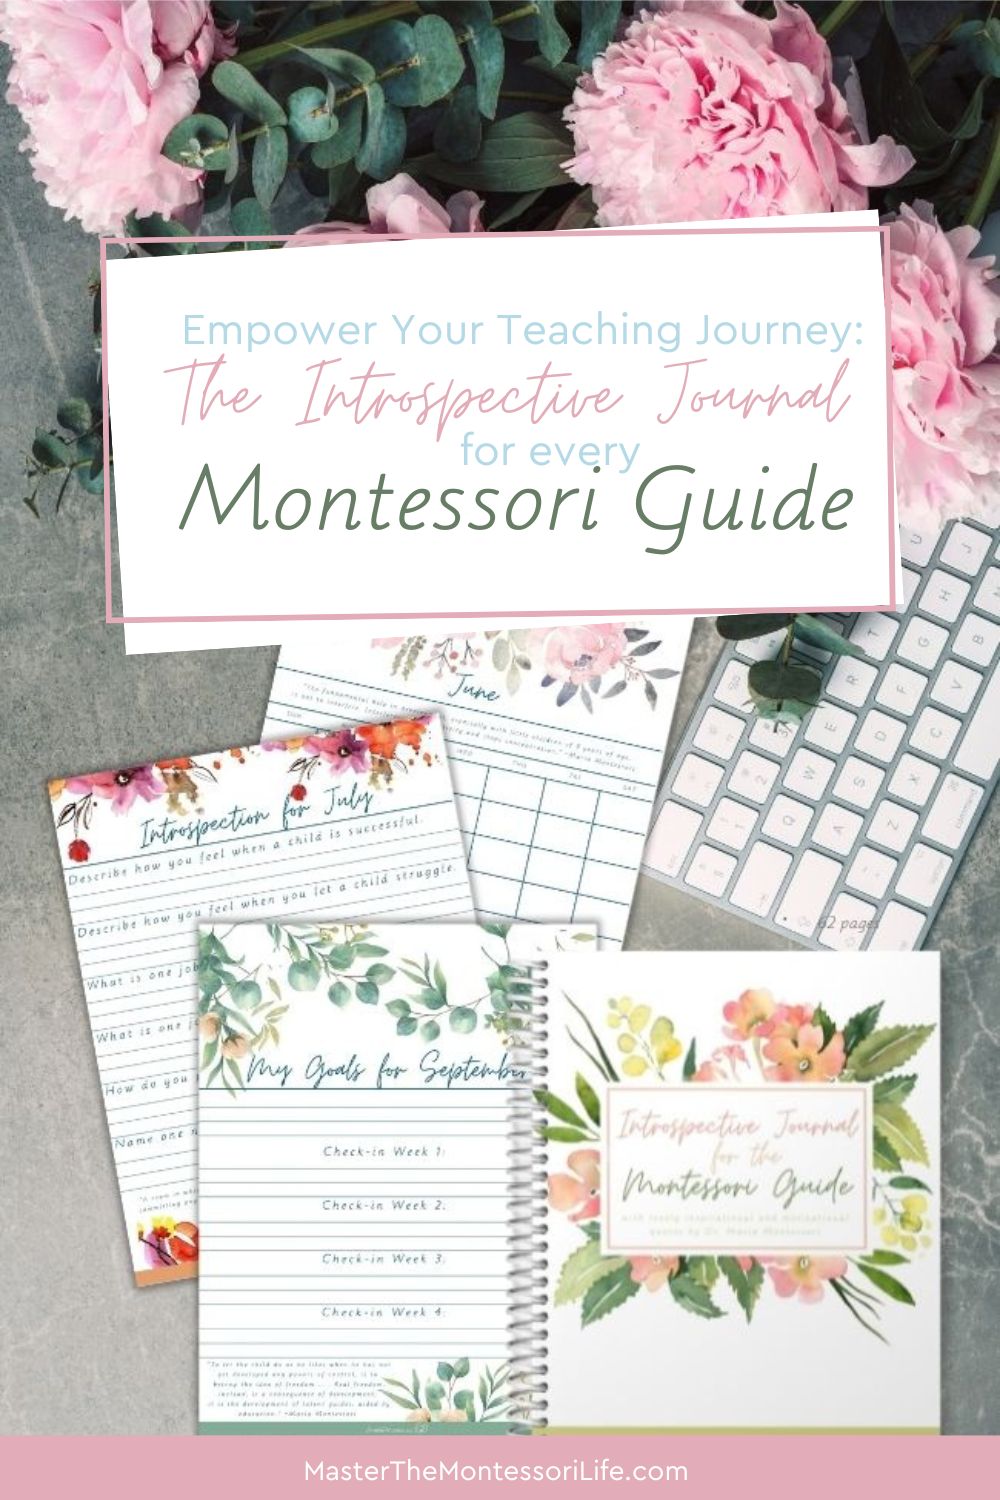 The Introspective Journal for Every Montessori Guide